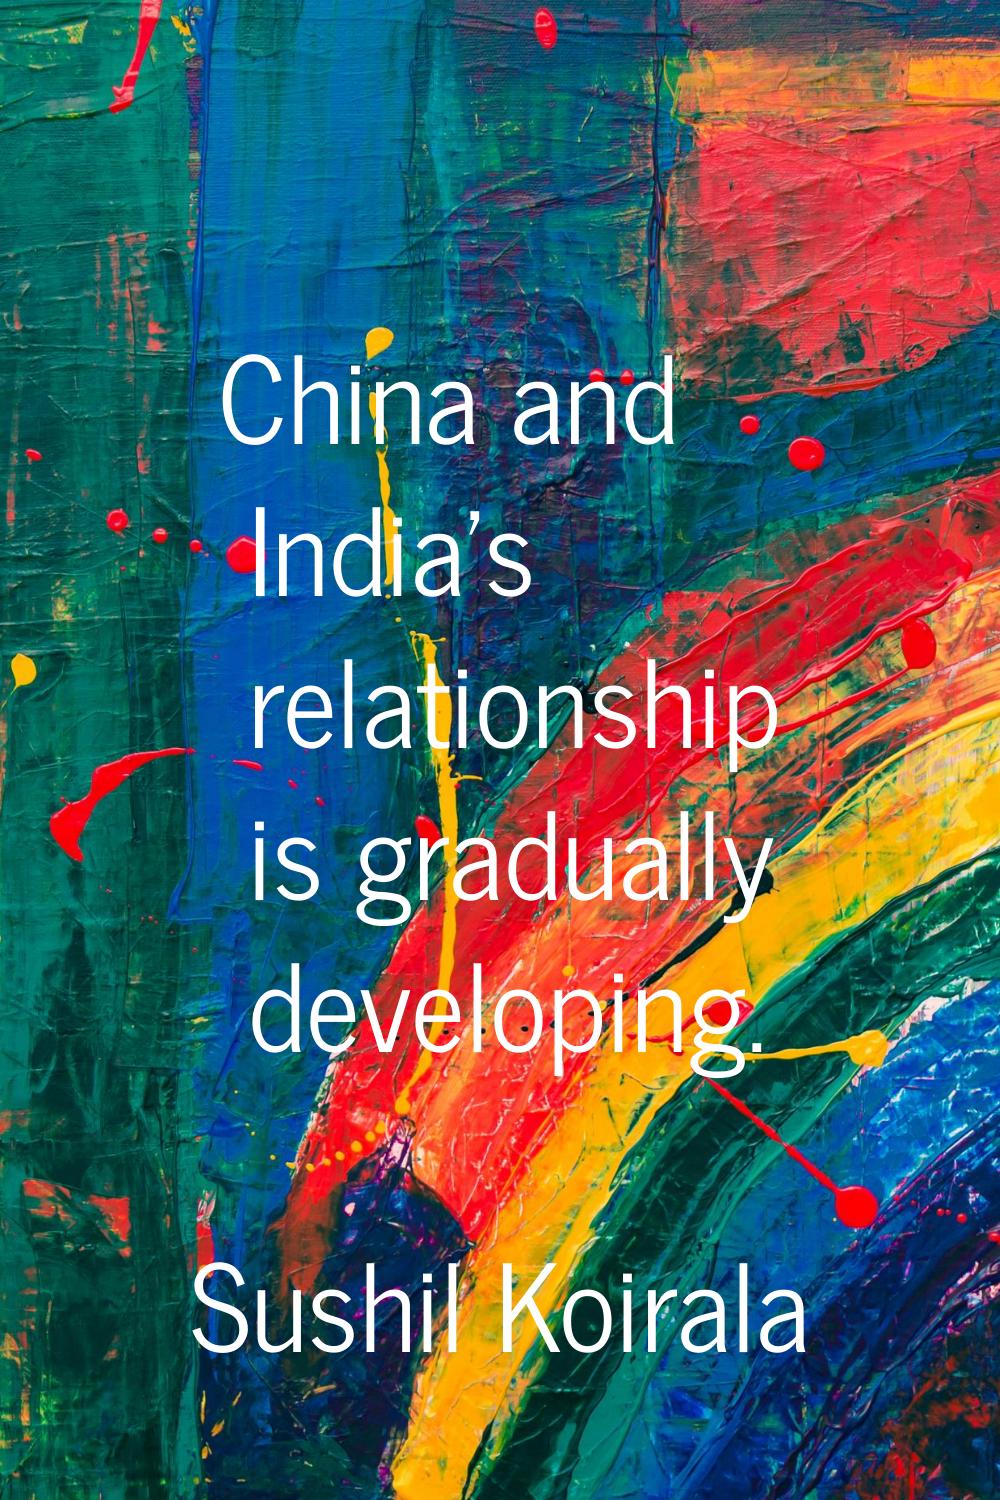 China and India's relationship is gradually developing.